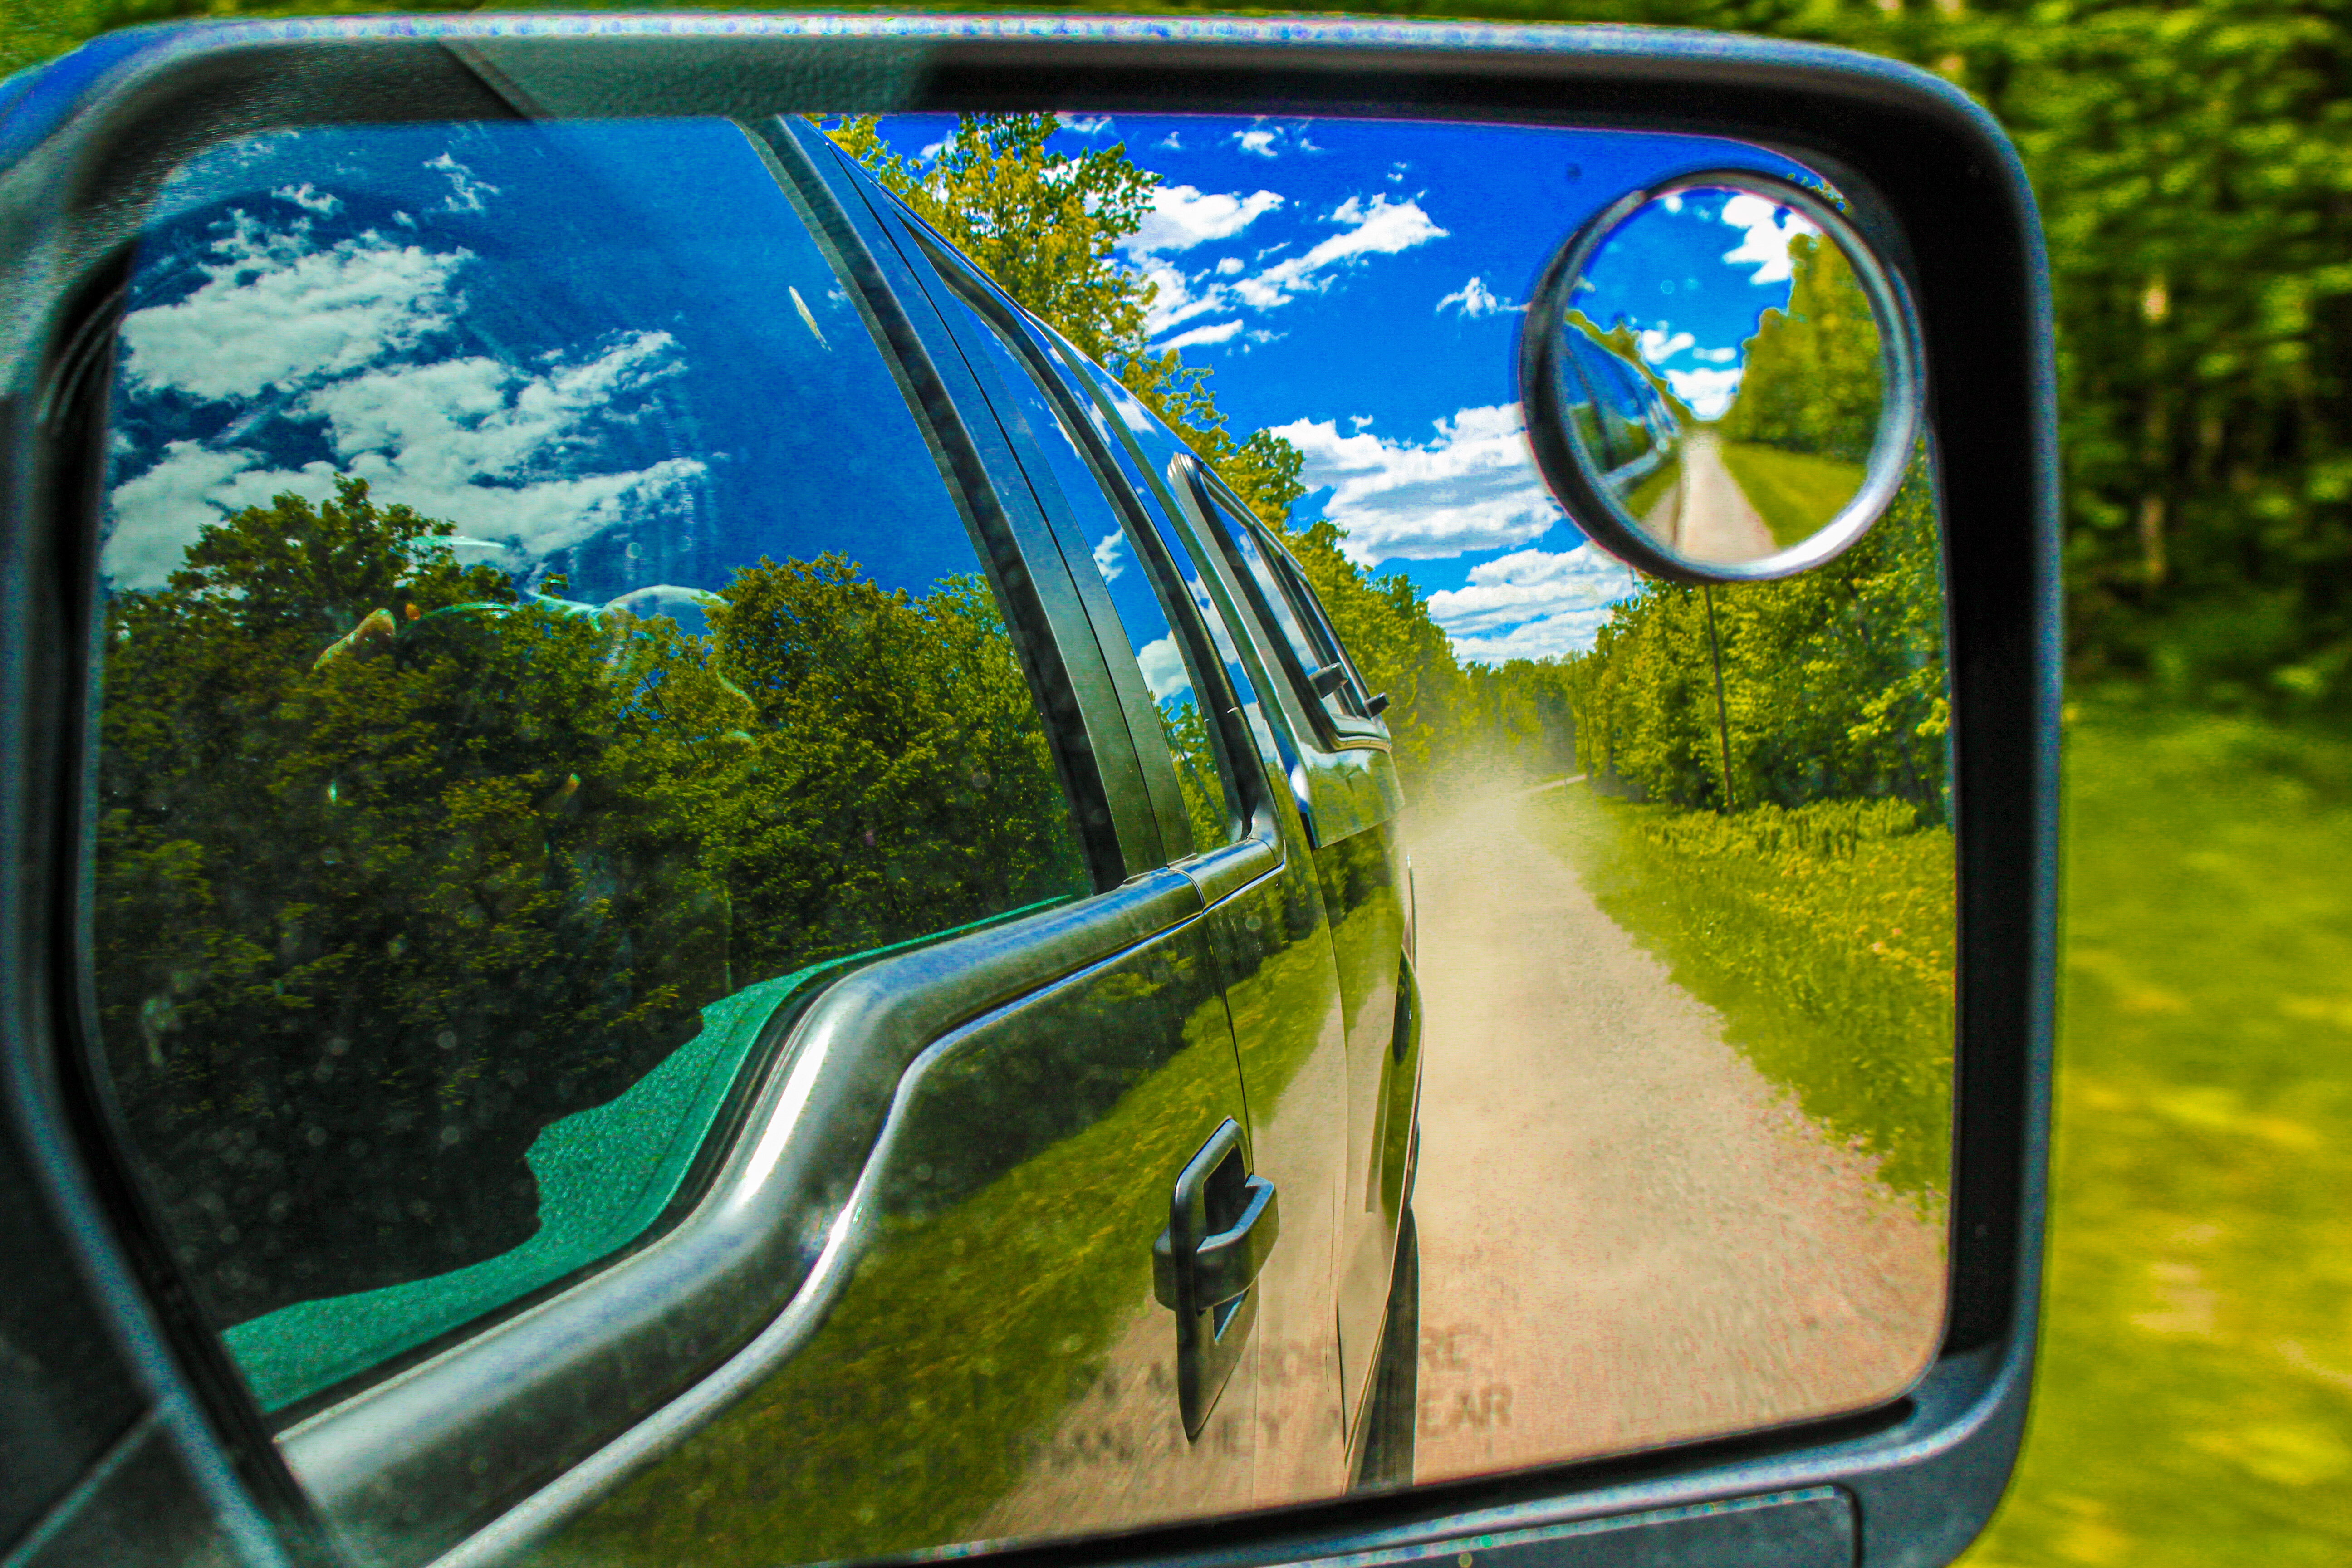 Photo of a sideview mirror of a car reflecting a dirt road, trees, and blue skies